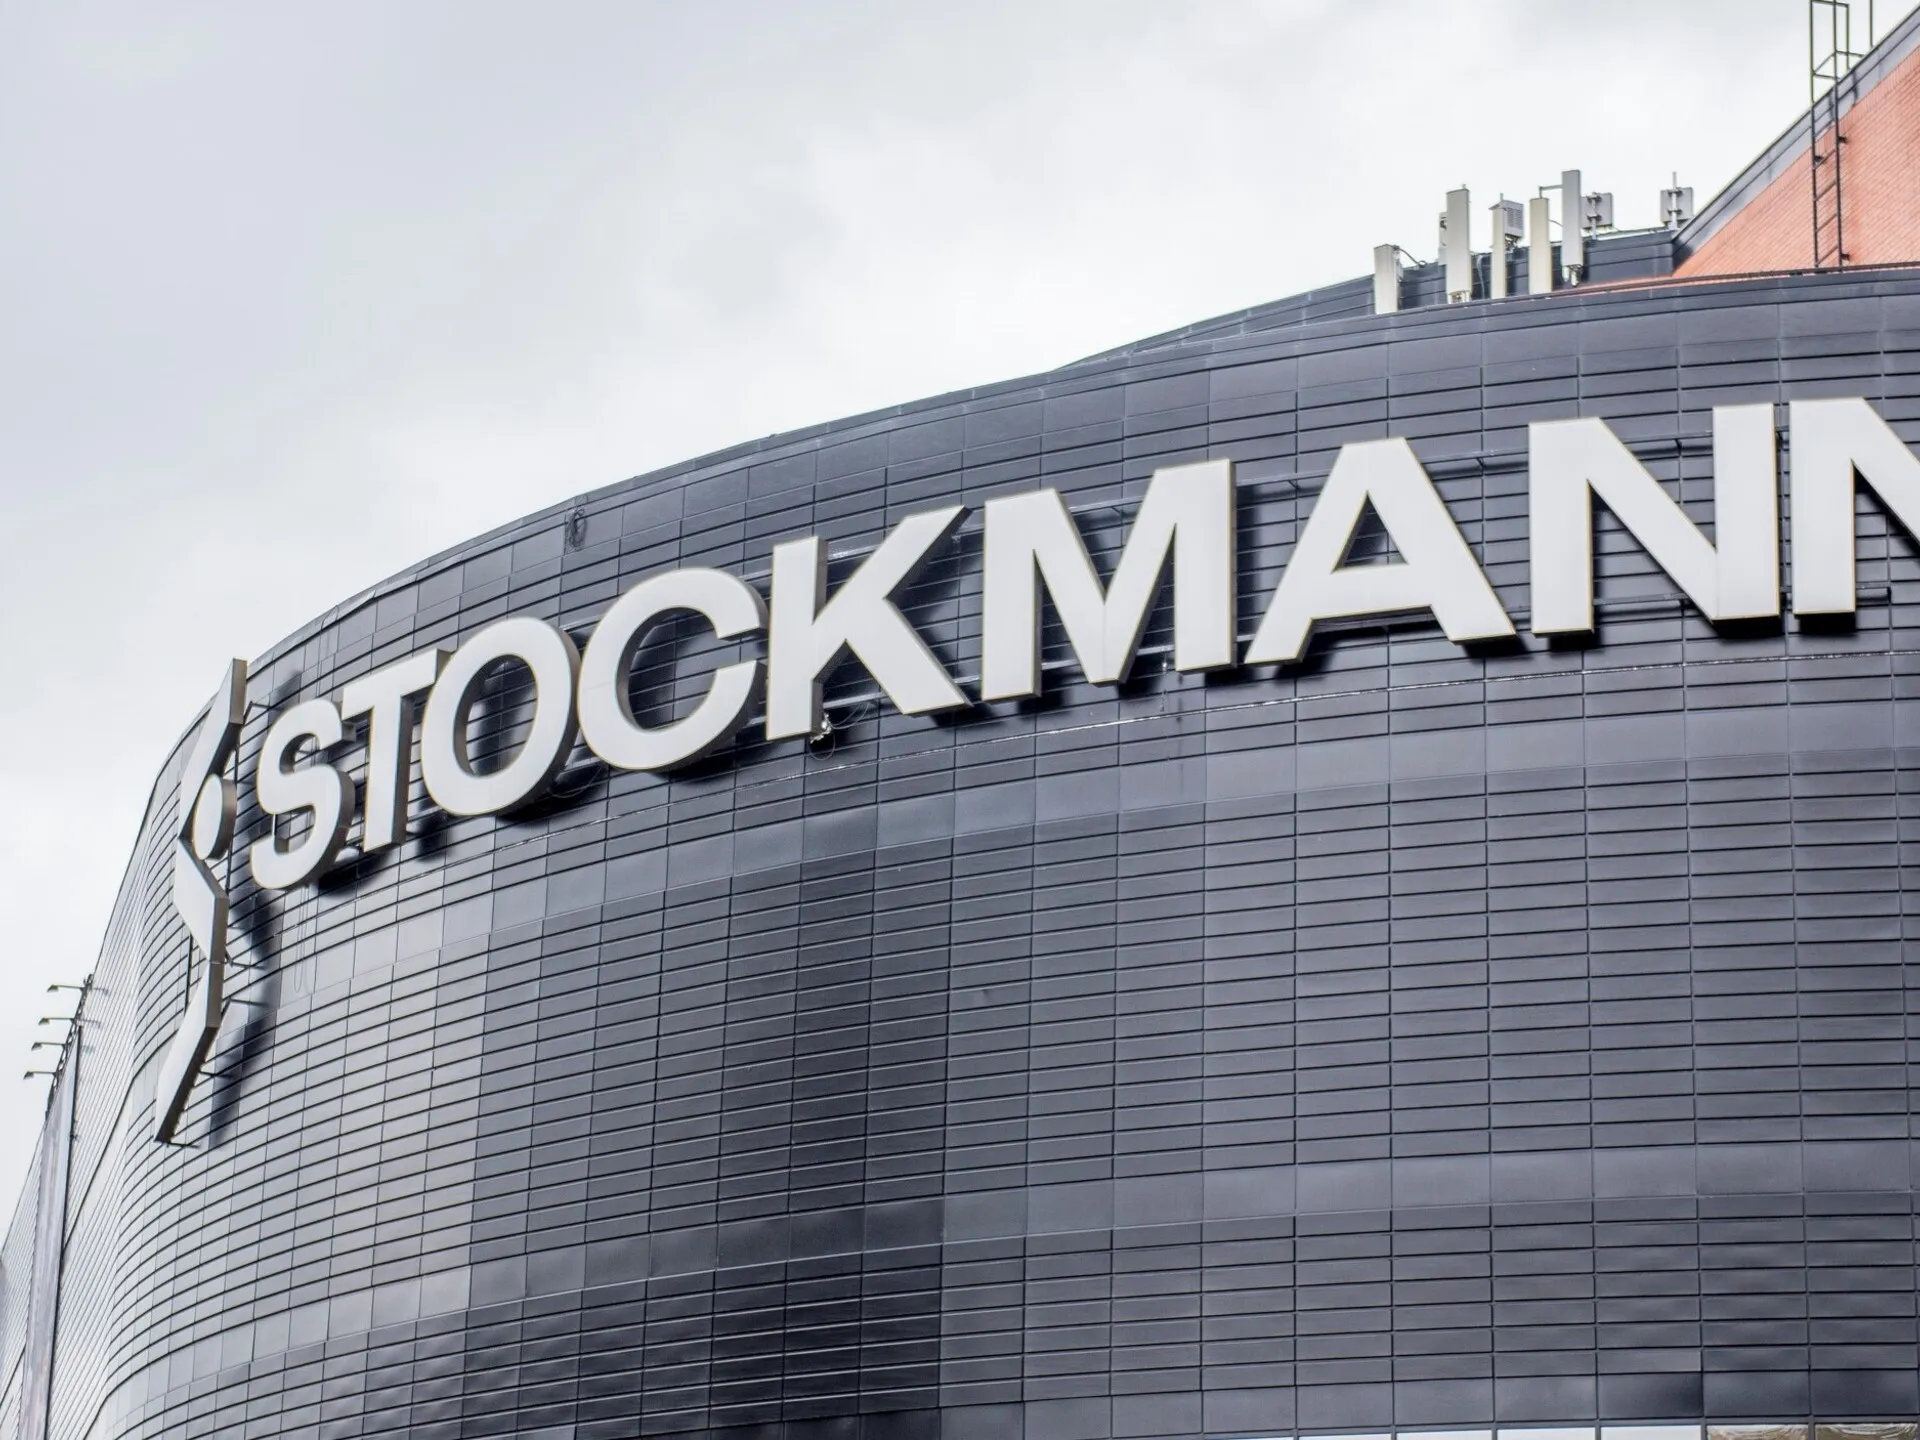 Stockmann in Estonia, europe | Handbags,Shoes,Accessories,Clothes,Cosmetics,Watches,Travel Bags - Country Helper